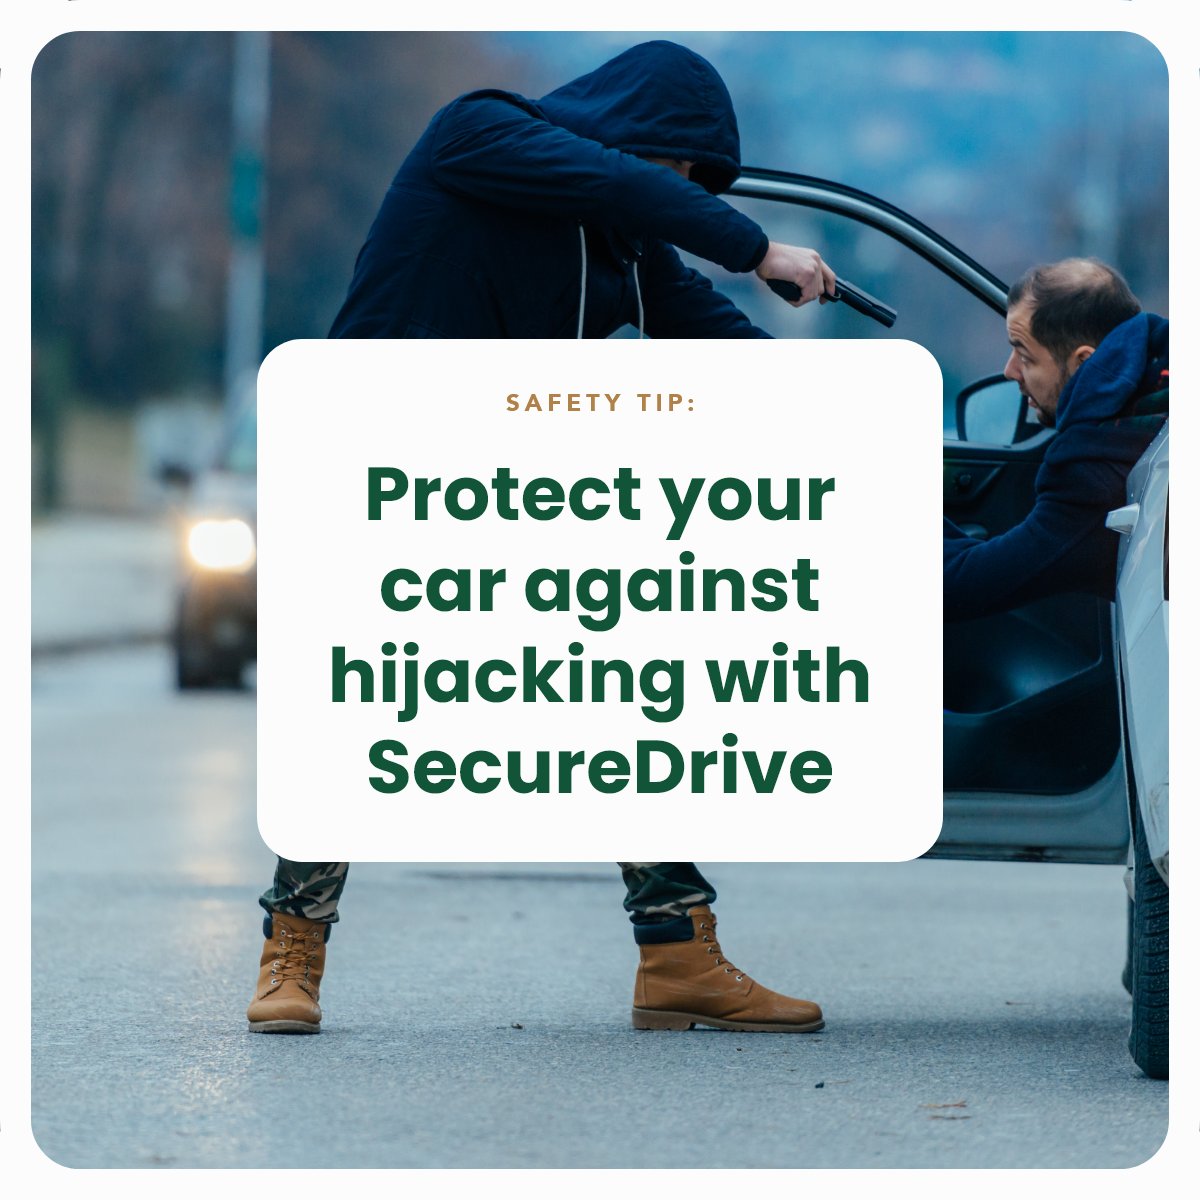 Don’t become a hijacking statistic. Get Fidelity SecureDrive and give your car the best protection on the road.

#FidelitySecureDrive #VehicleTracking #YourDrivingCompanion